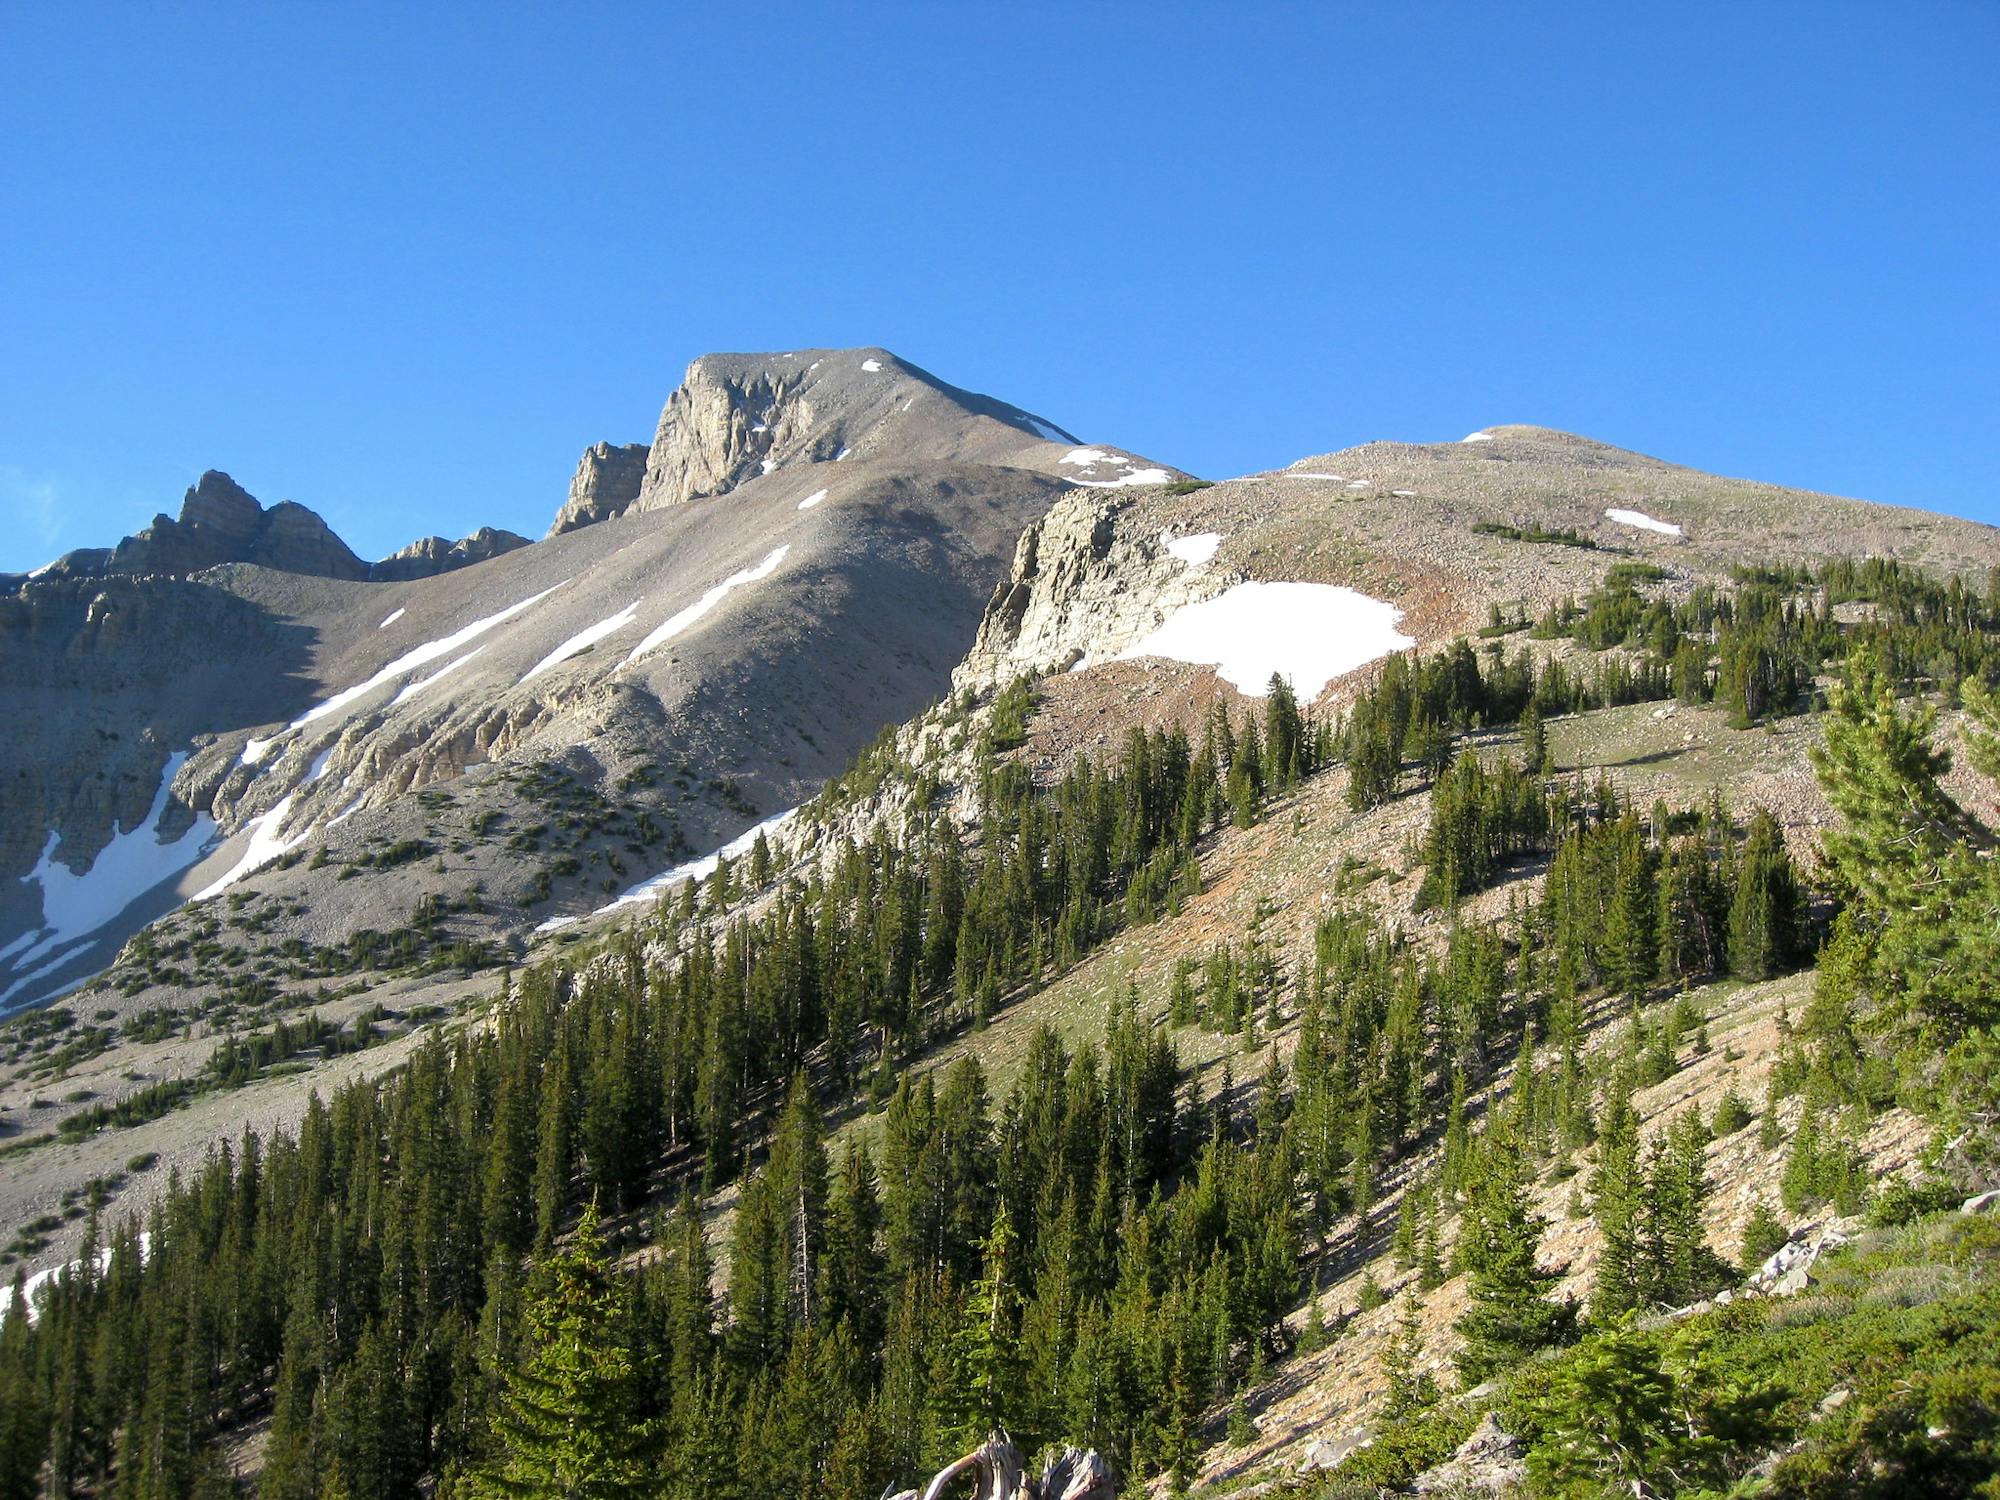 View of Wheeler Peak near the start of the trail.